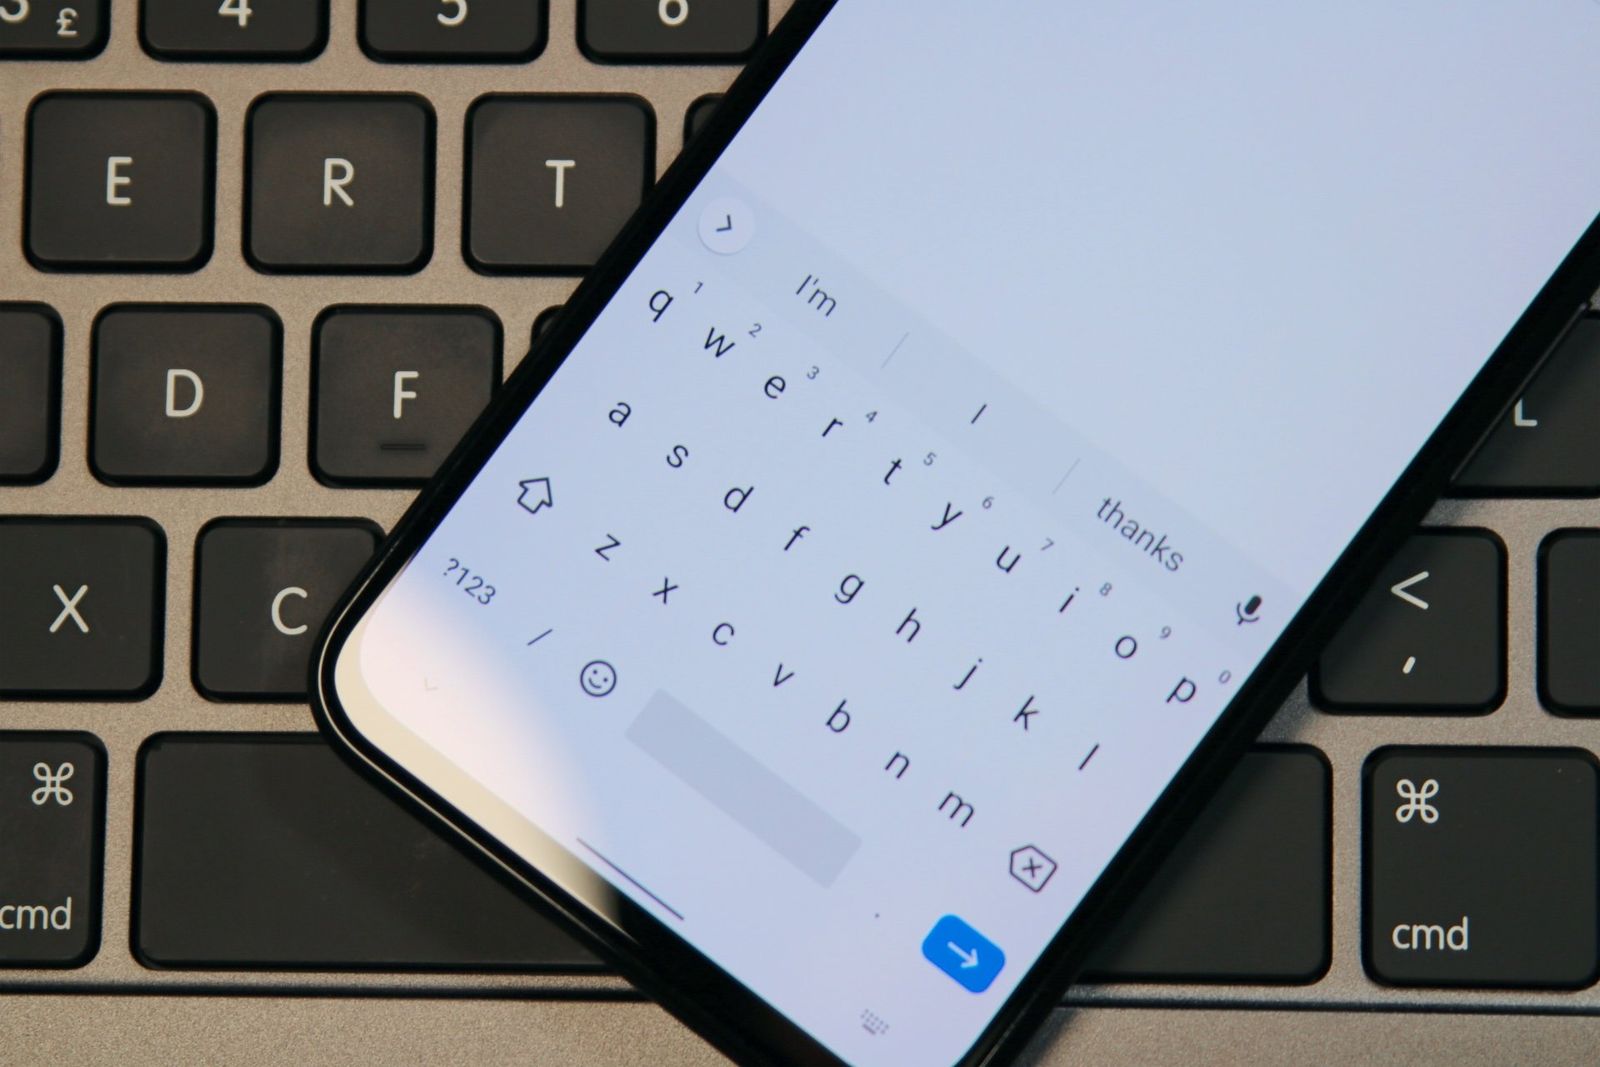 How To Change The Keyboard On Your Android Phone Android Central